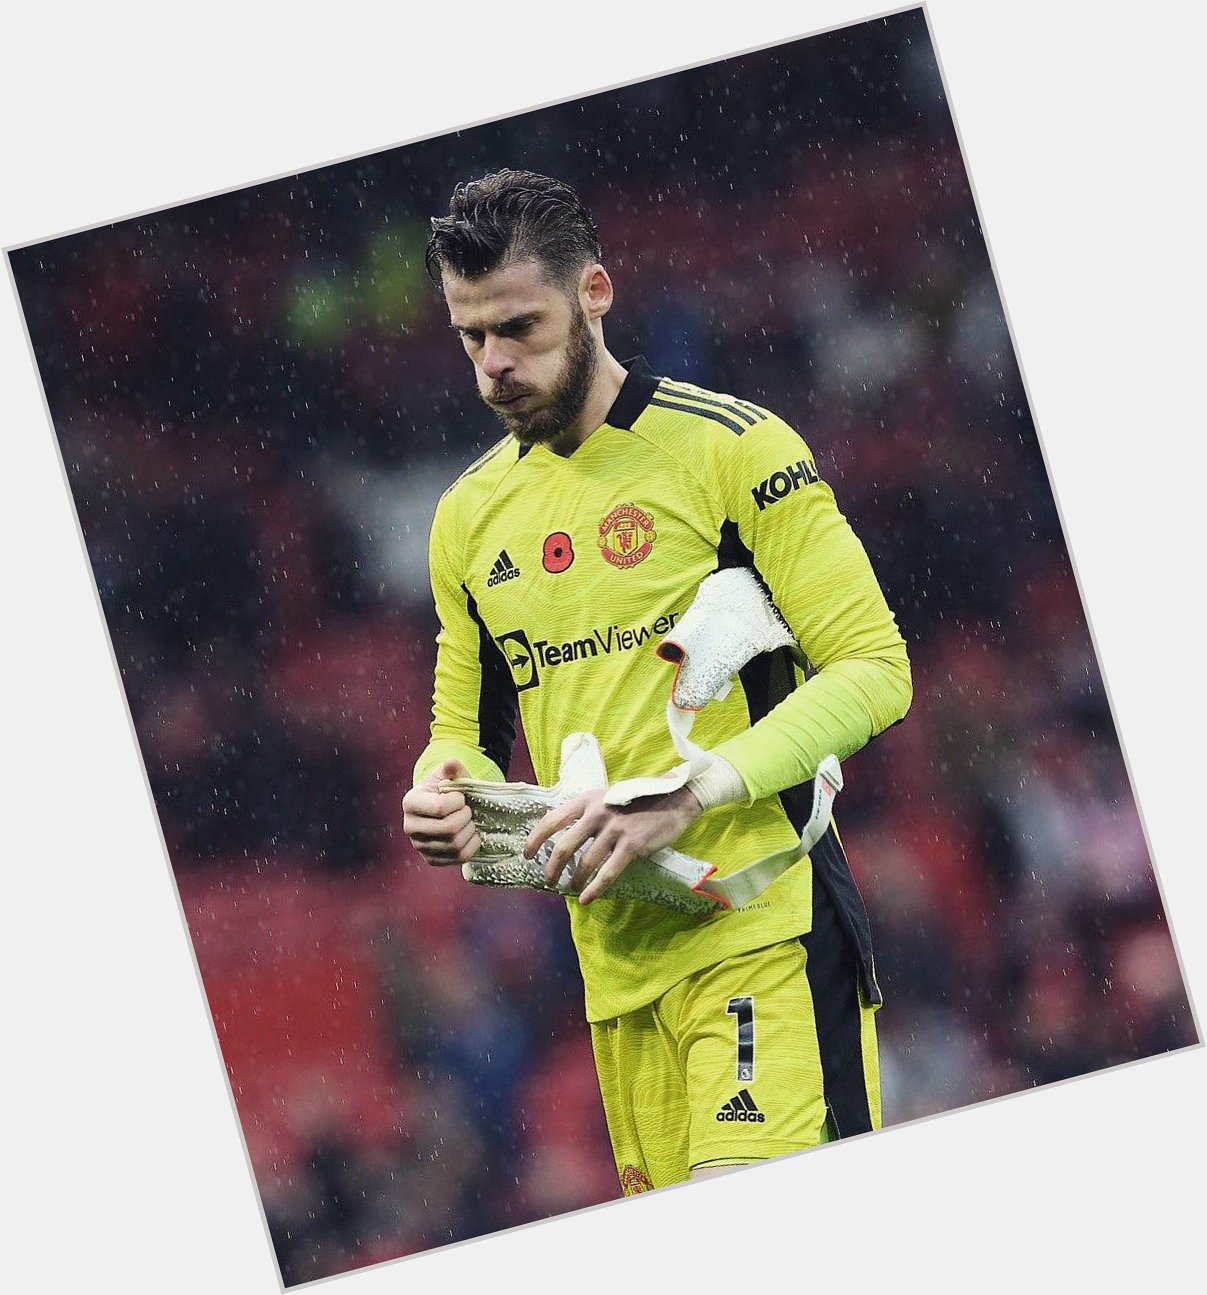 Happy birthday to a goalkeeper, David de Gea, who saves Manchester United from Manchester United players too. 